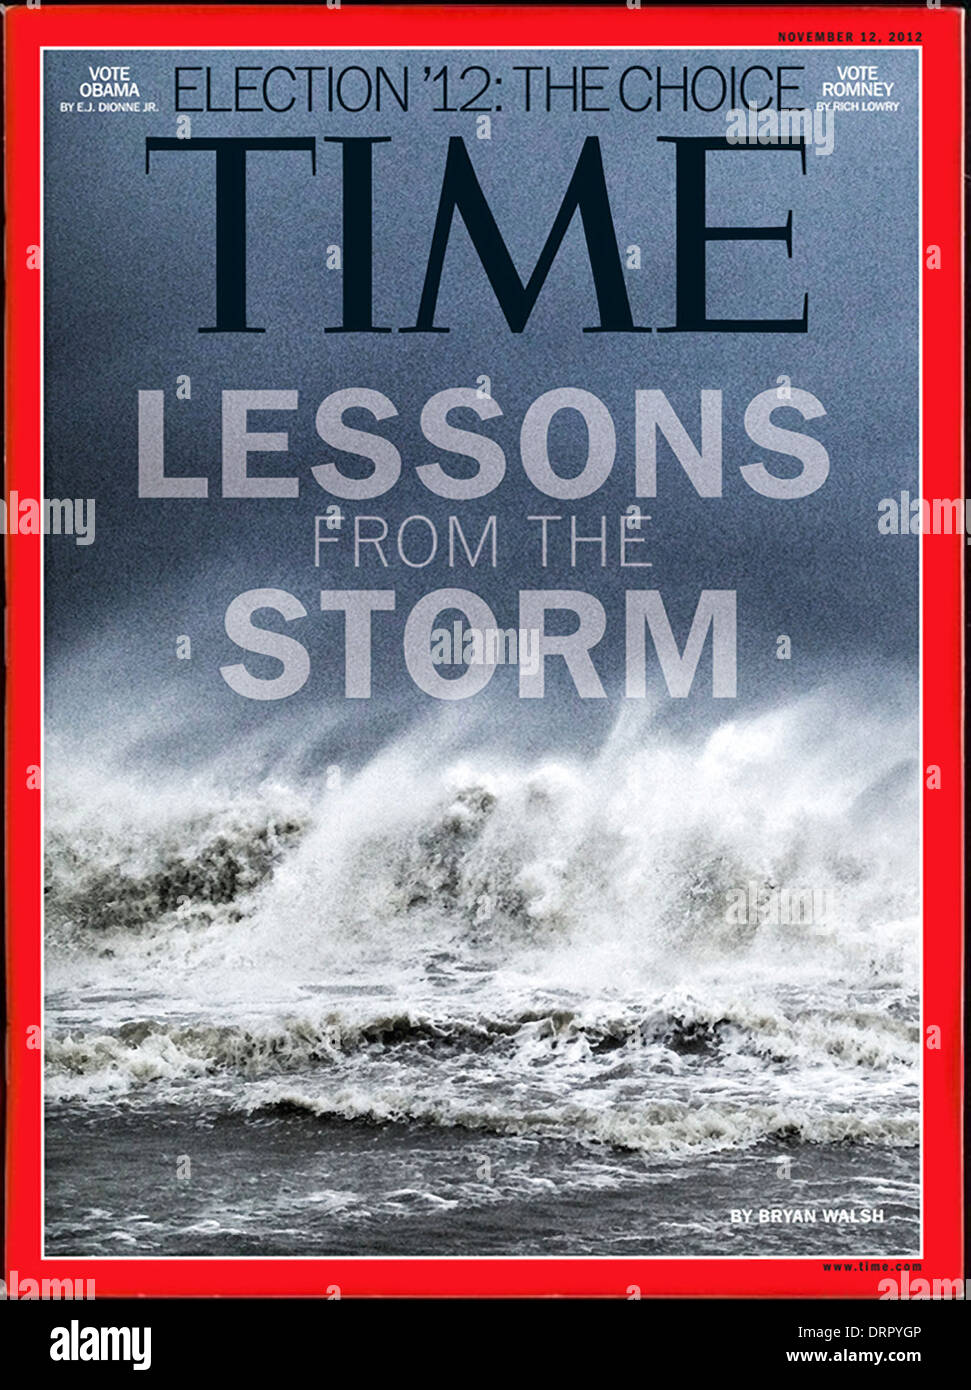 Time Magazine featuring Instagram image of Hurricane Sandy taken by Bryan Walsh on its front cover 12 November 2012 issue. Stock Photo